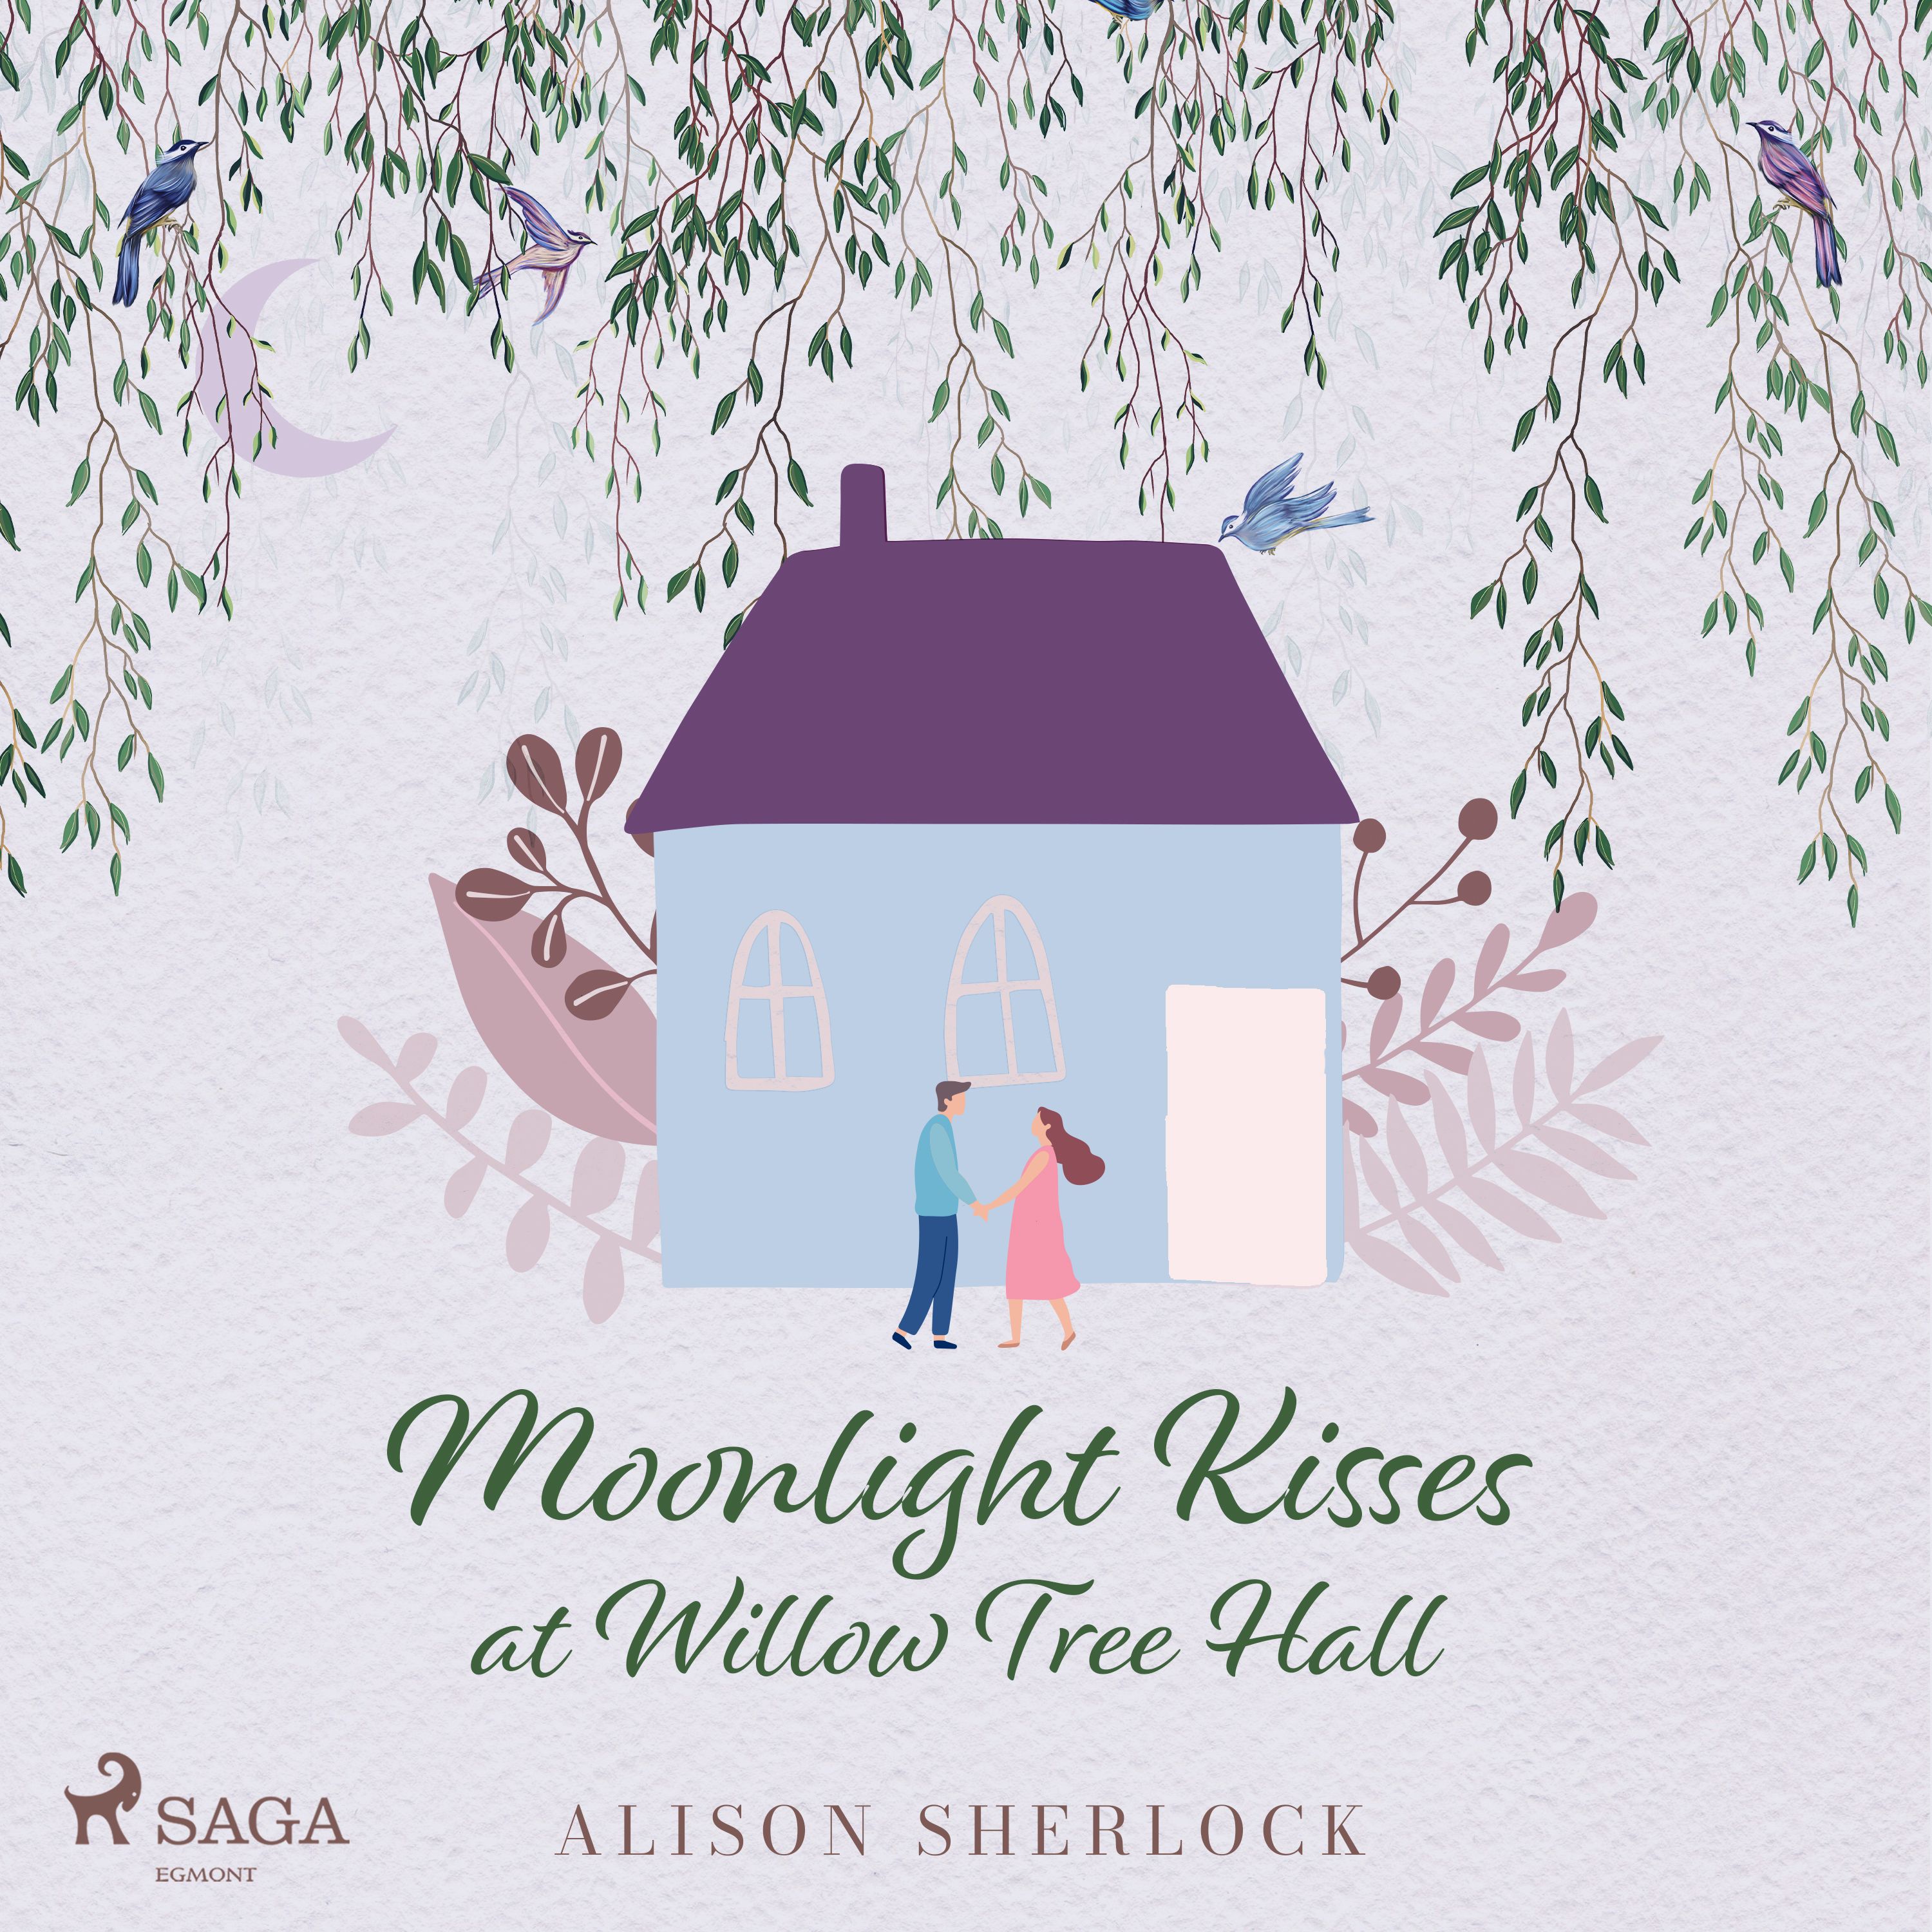 Moonlight Kisses at Willow Tree Hall, audiobook by Alison Sherlock